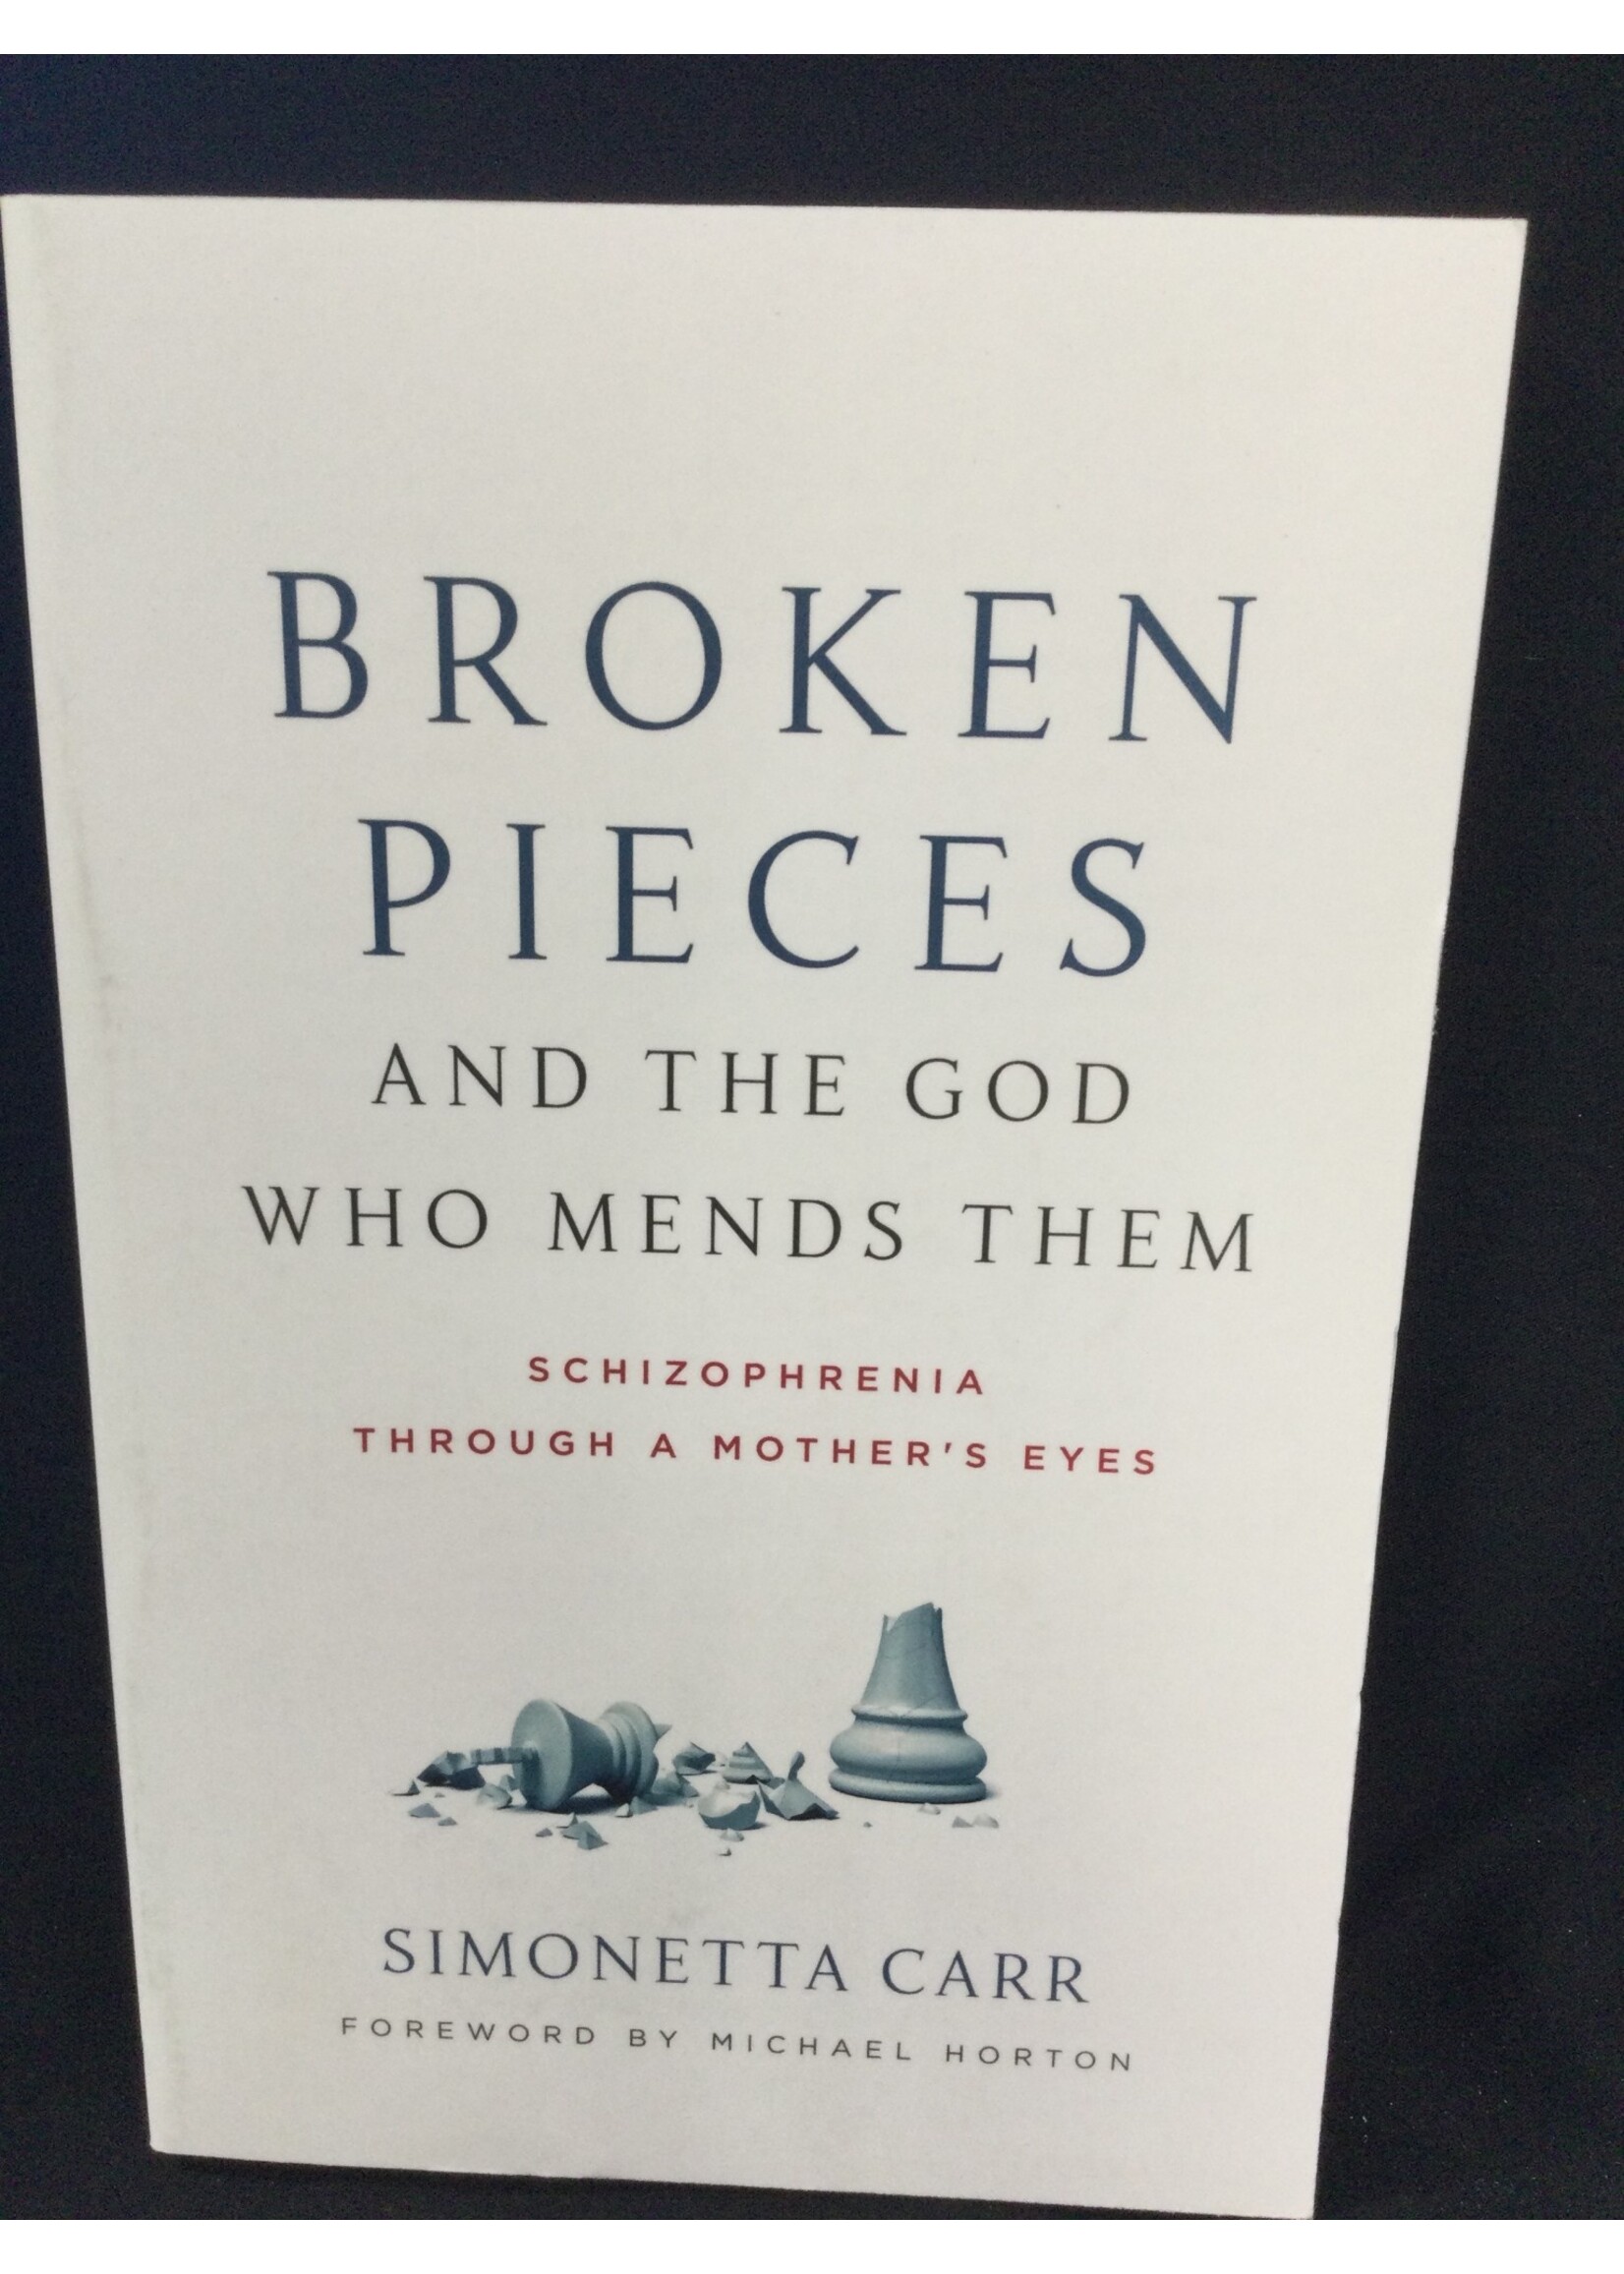 BROKEN PIECES AND THE GOD WHO MENDS